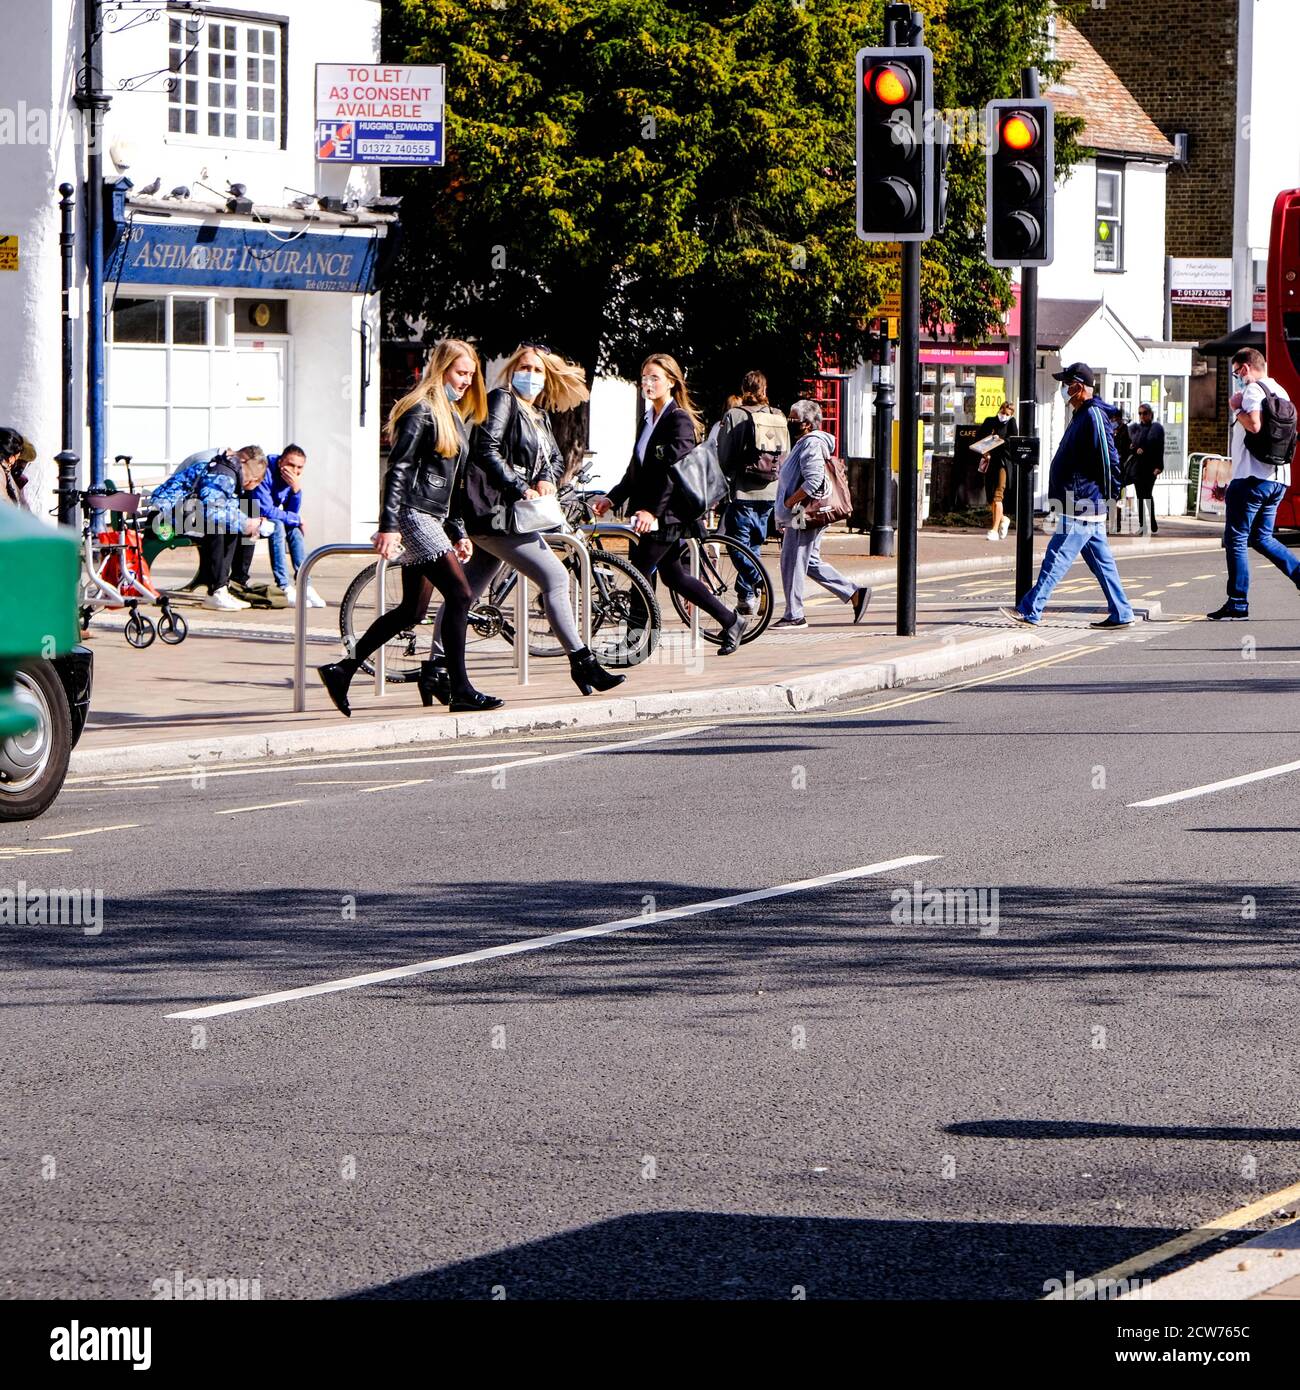 London UK, September 28 2020, Group Of Young People Crossing Road At Traffic Lights COVID-19 Stock Photo